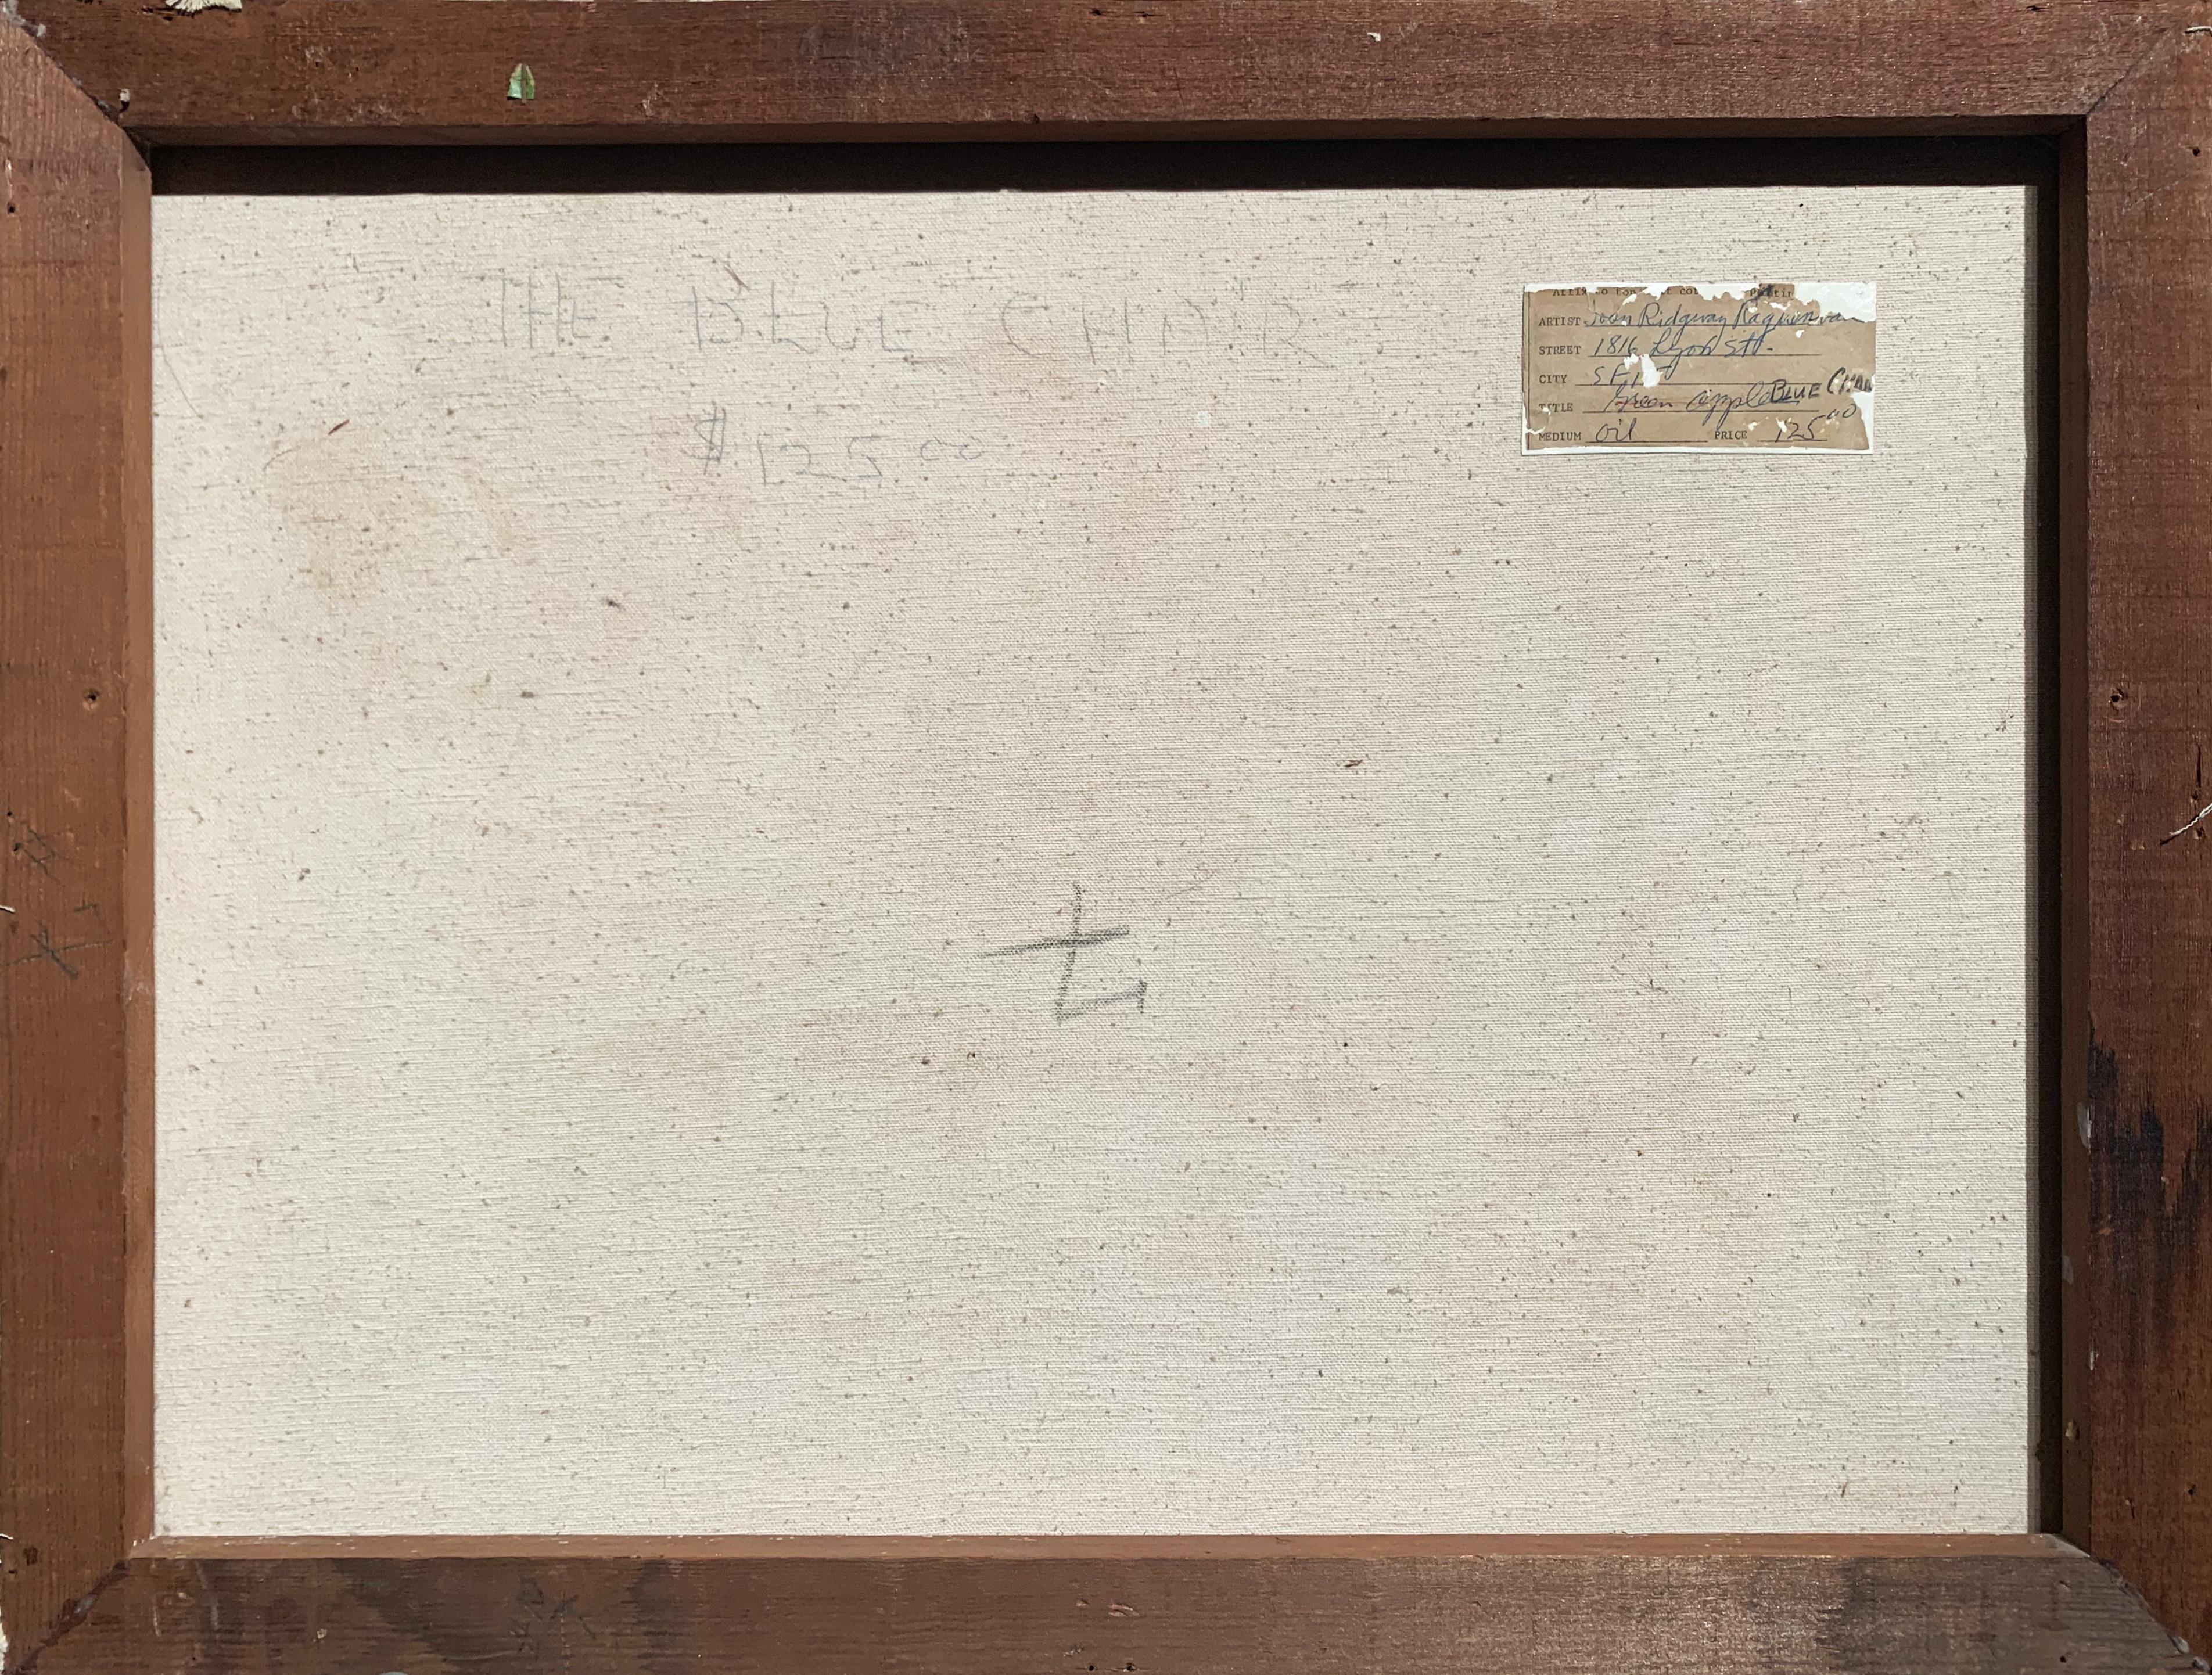 Initialed lower right, 'J.R.' for Joan Ridgway Raguenvan (American, 20th century) and painted circa 1960. Bearing old exhibition label, verso, on stretcher bar with title, 'Blue Chair', signed, 'Joan Ridgway Raguenvan'. Additionally signed, verso,